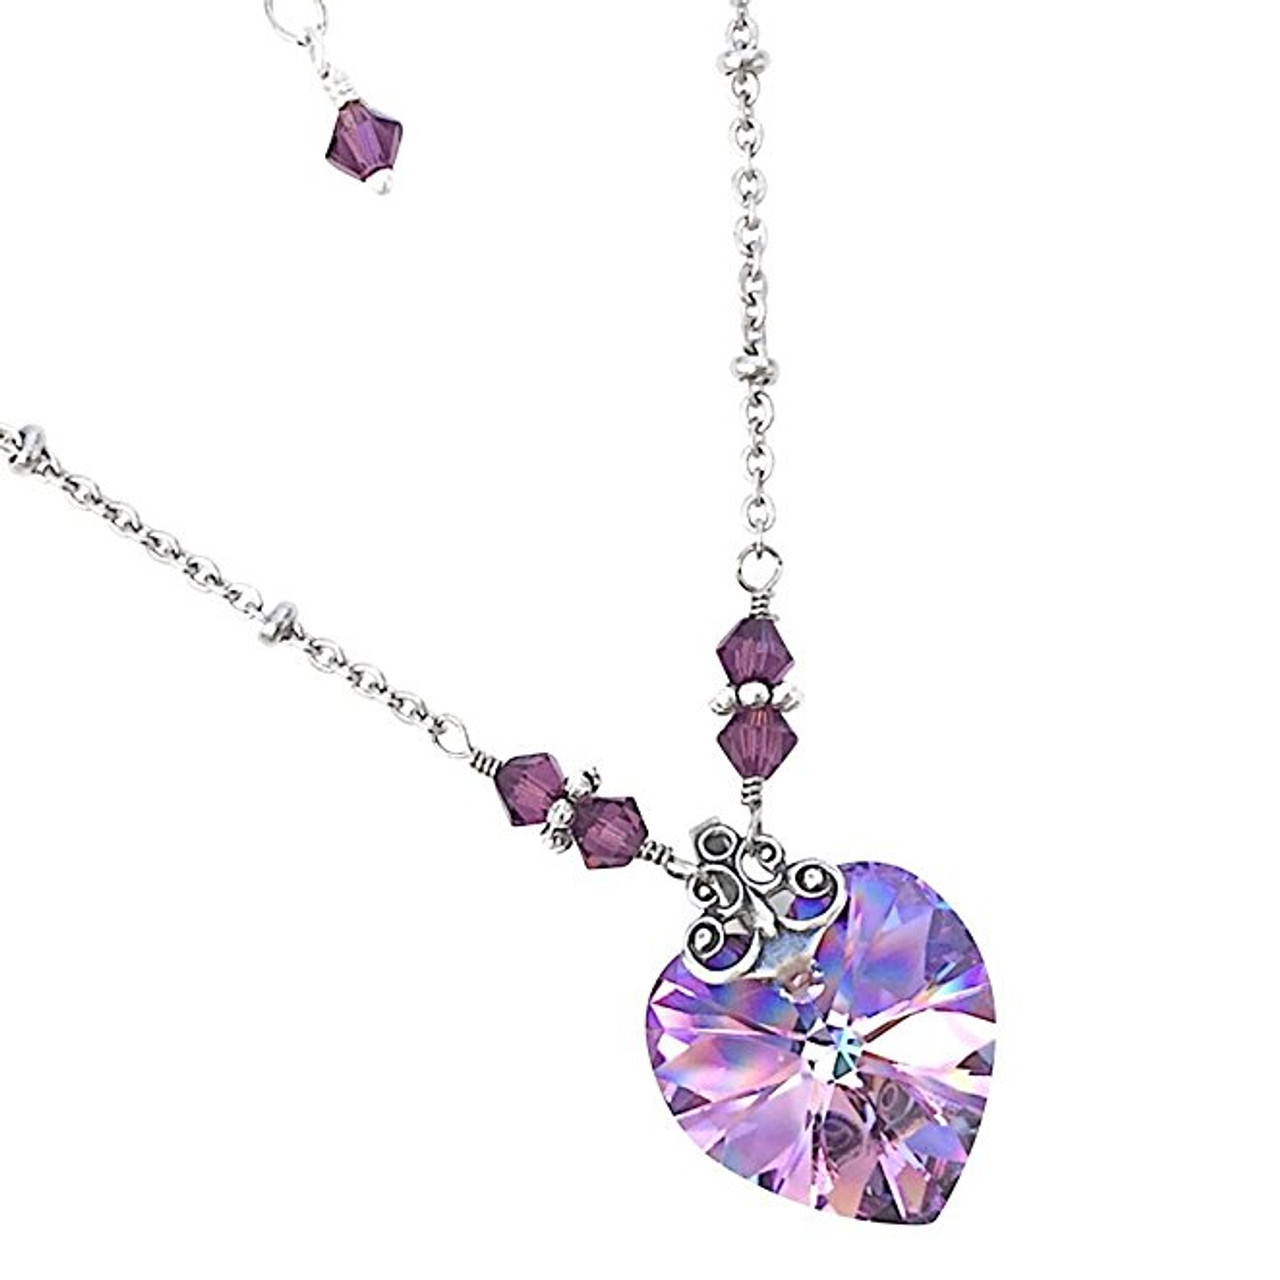 Paparazzi Necklace ~ Check Your Heart Rate - Purple – Paparazzi Jewelry |  Online Store | DebsJewelryShop.com